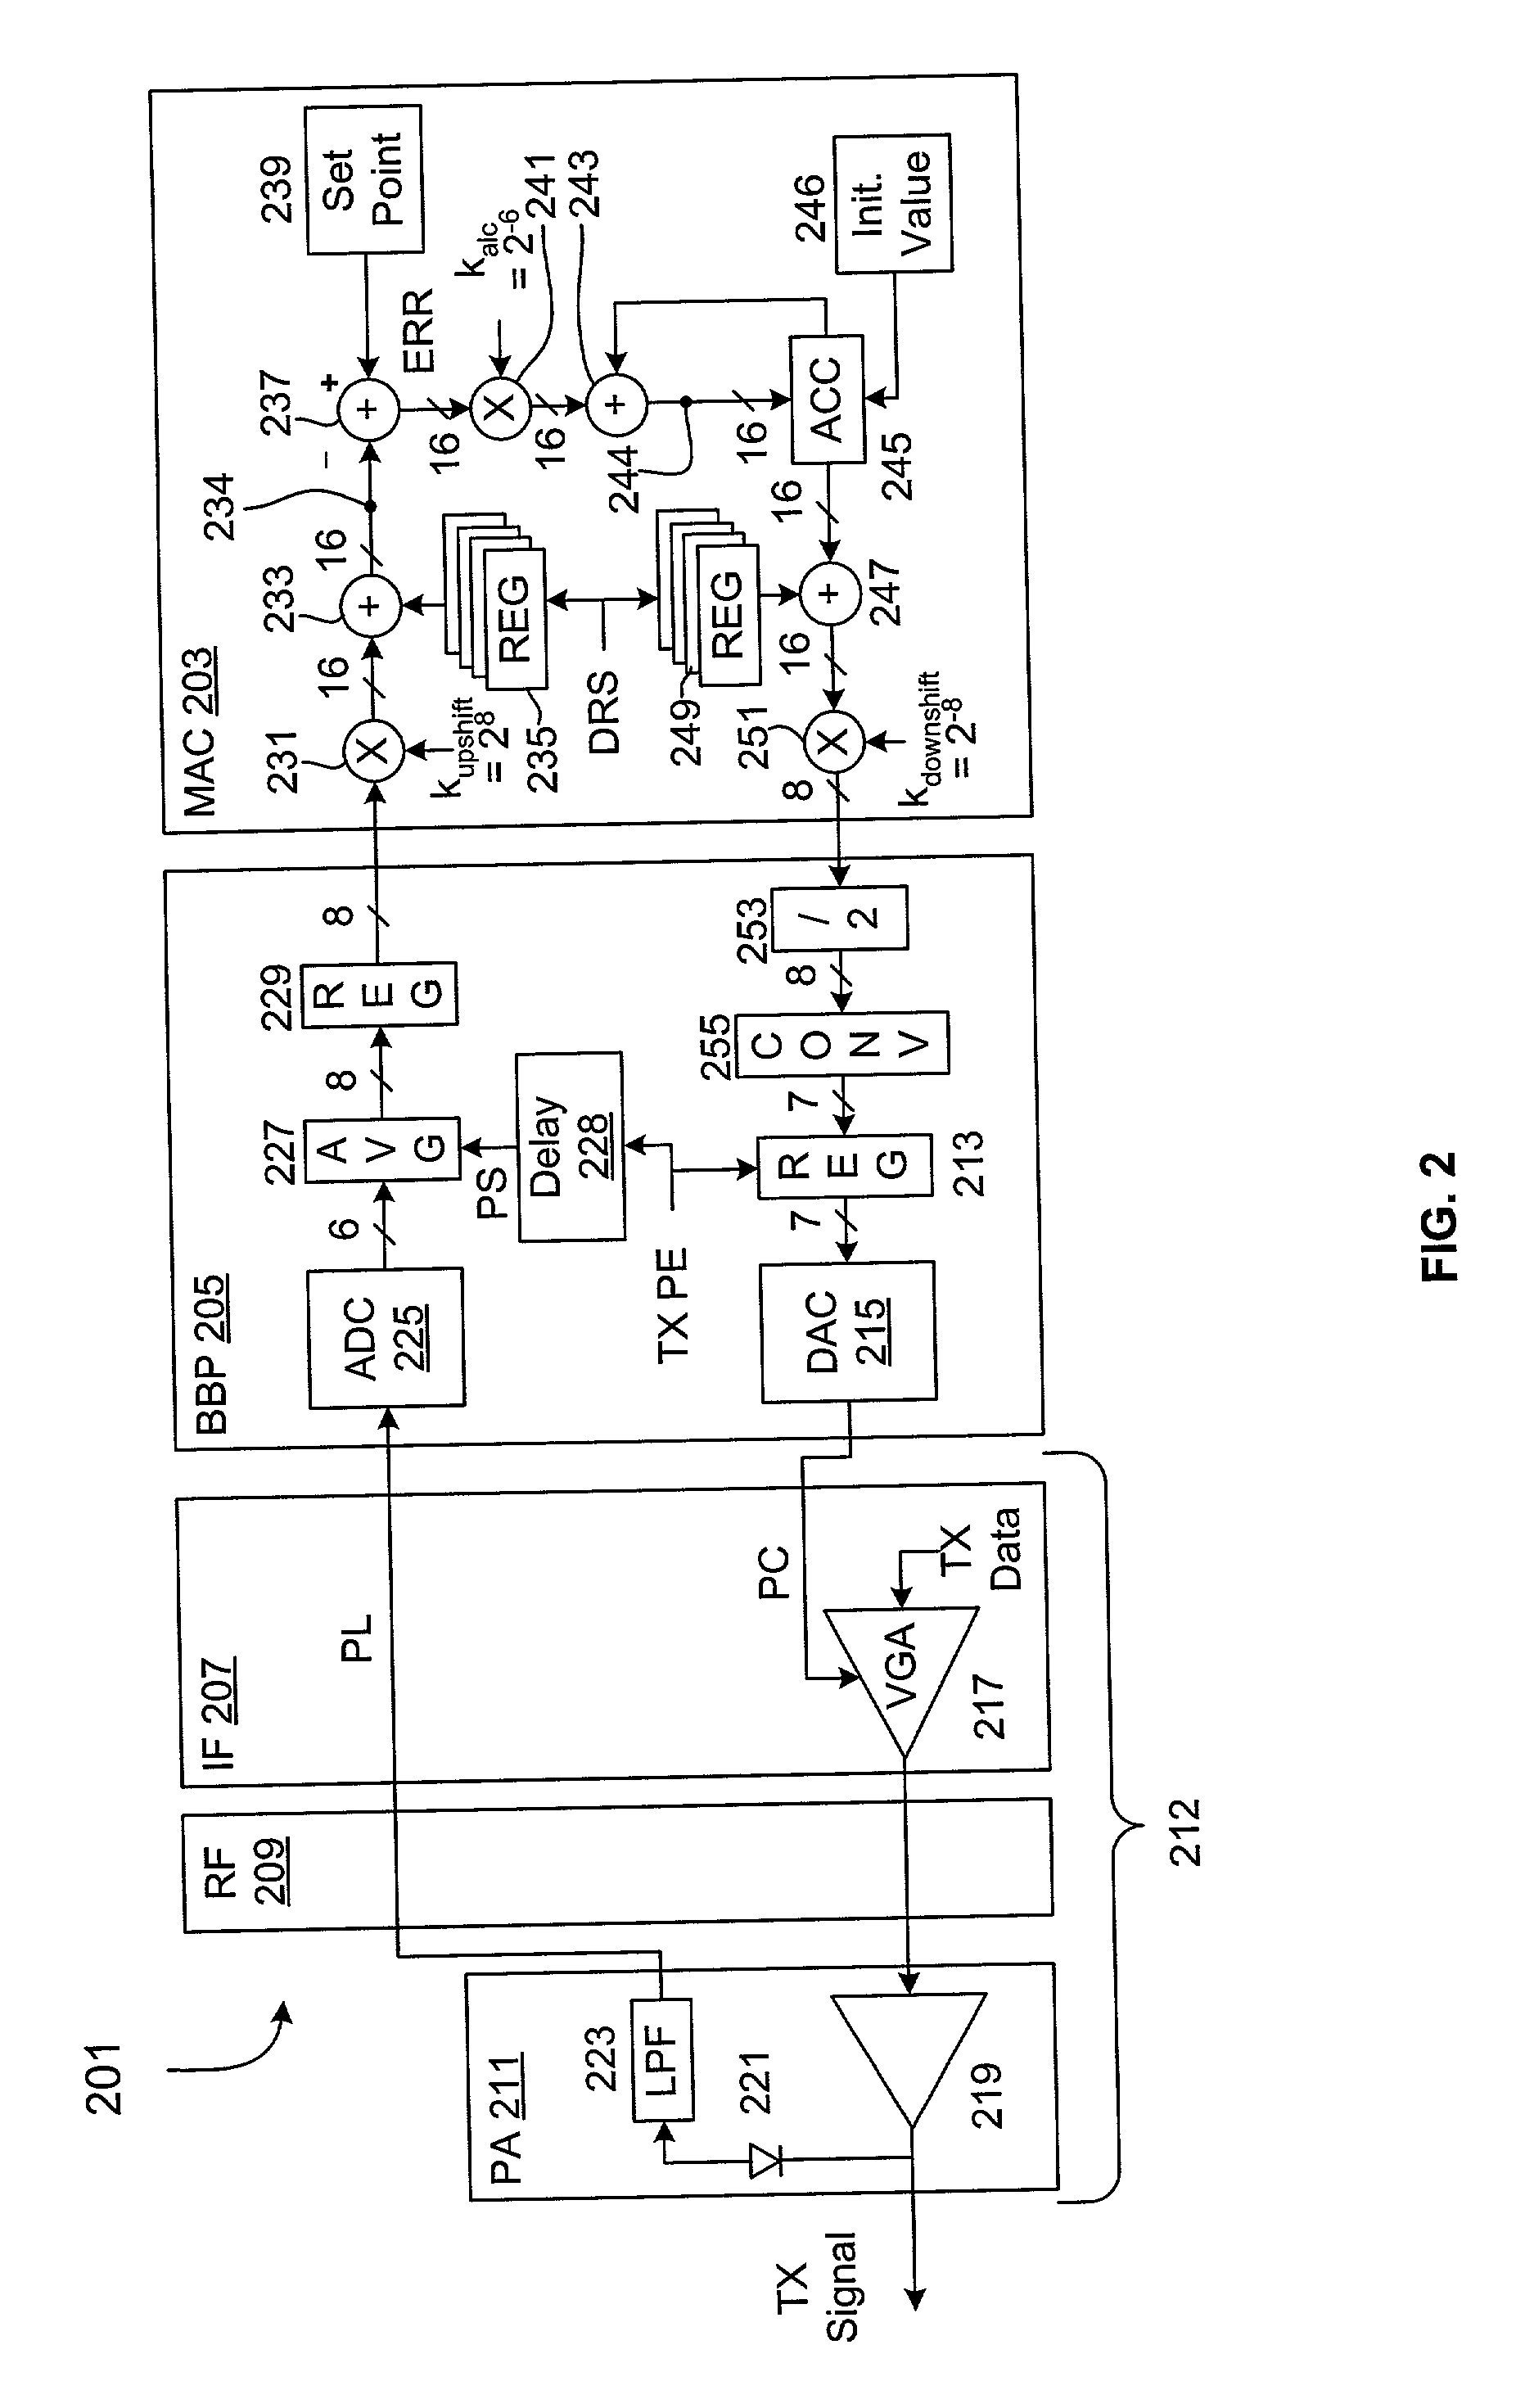 Transmit power control for multiple rate wireless communications